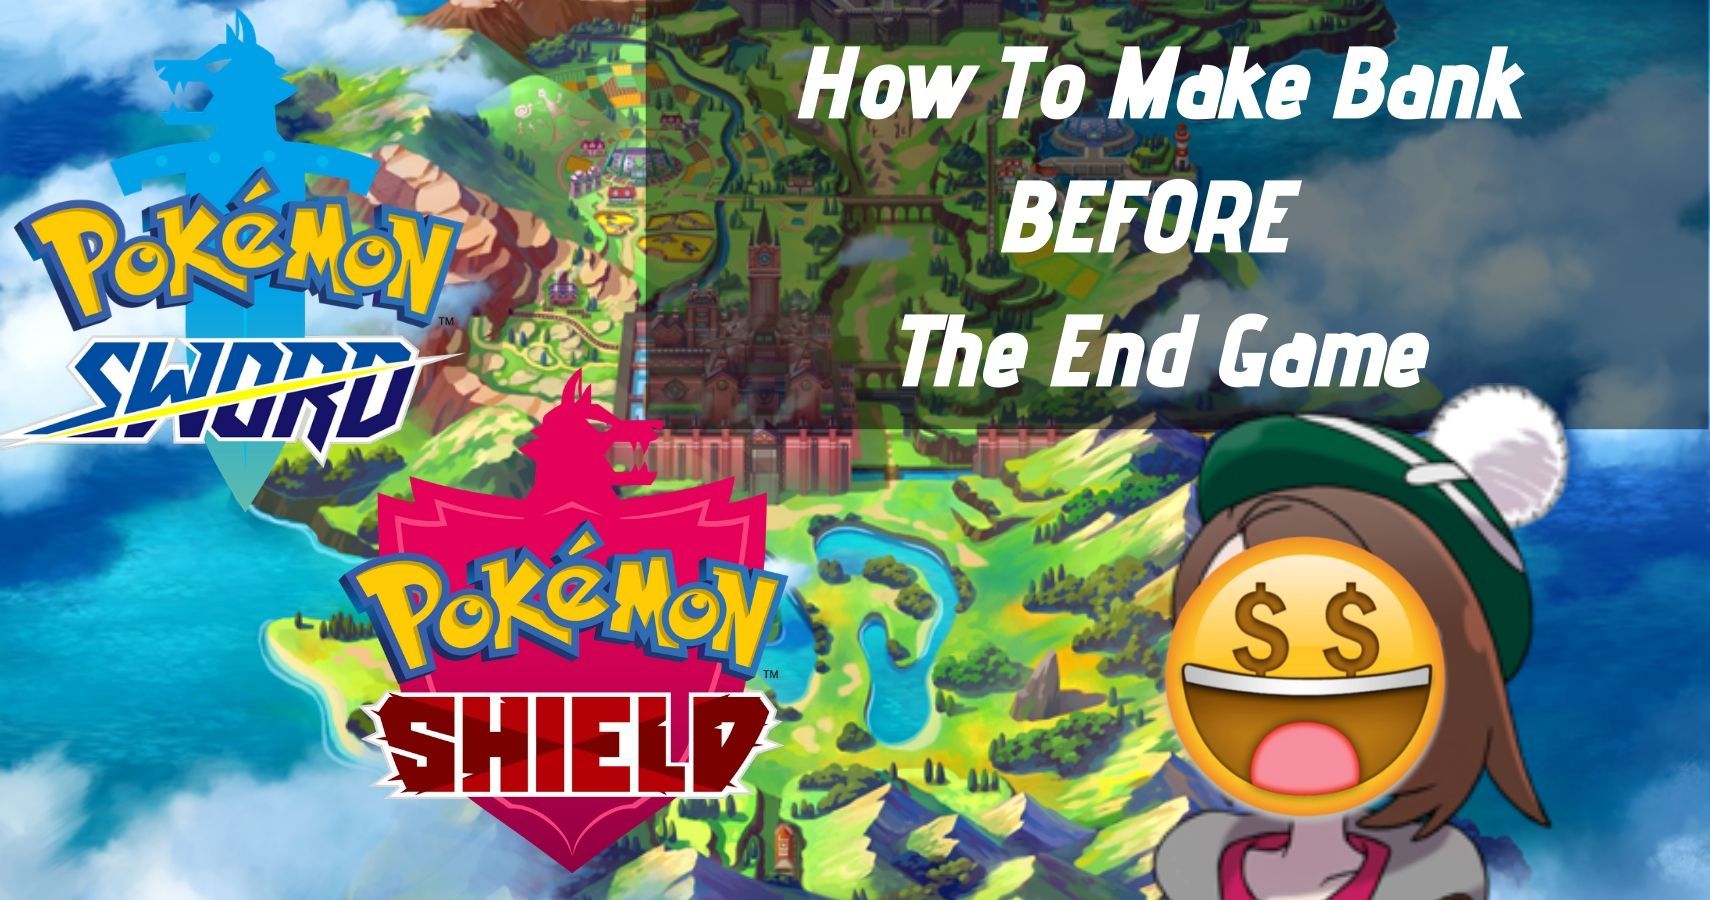 Pokemon Sword & Shield How To Make Bank BEFORE The End Game